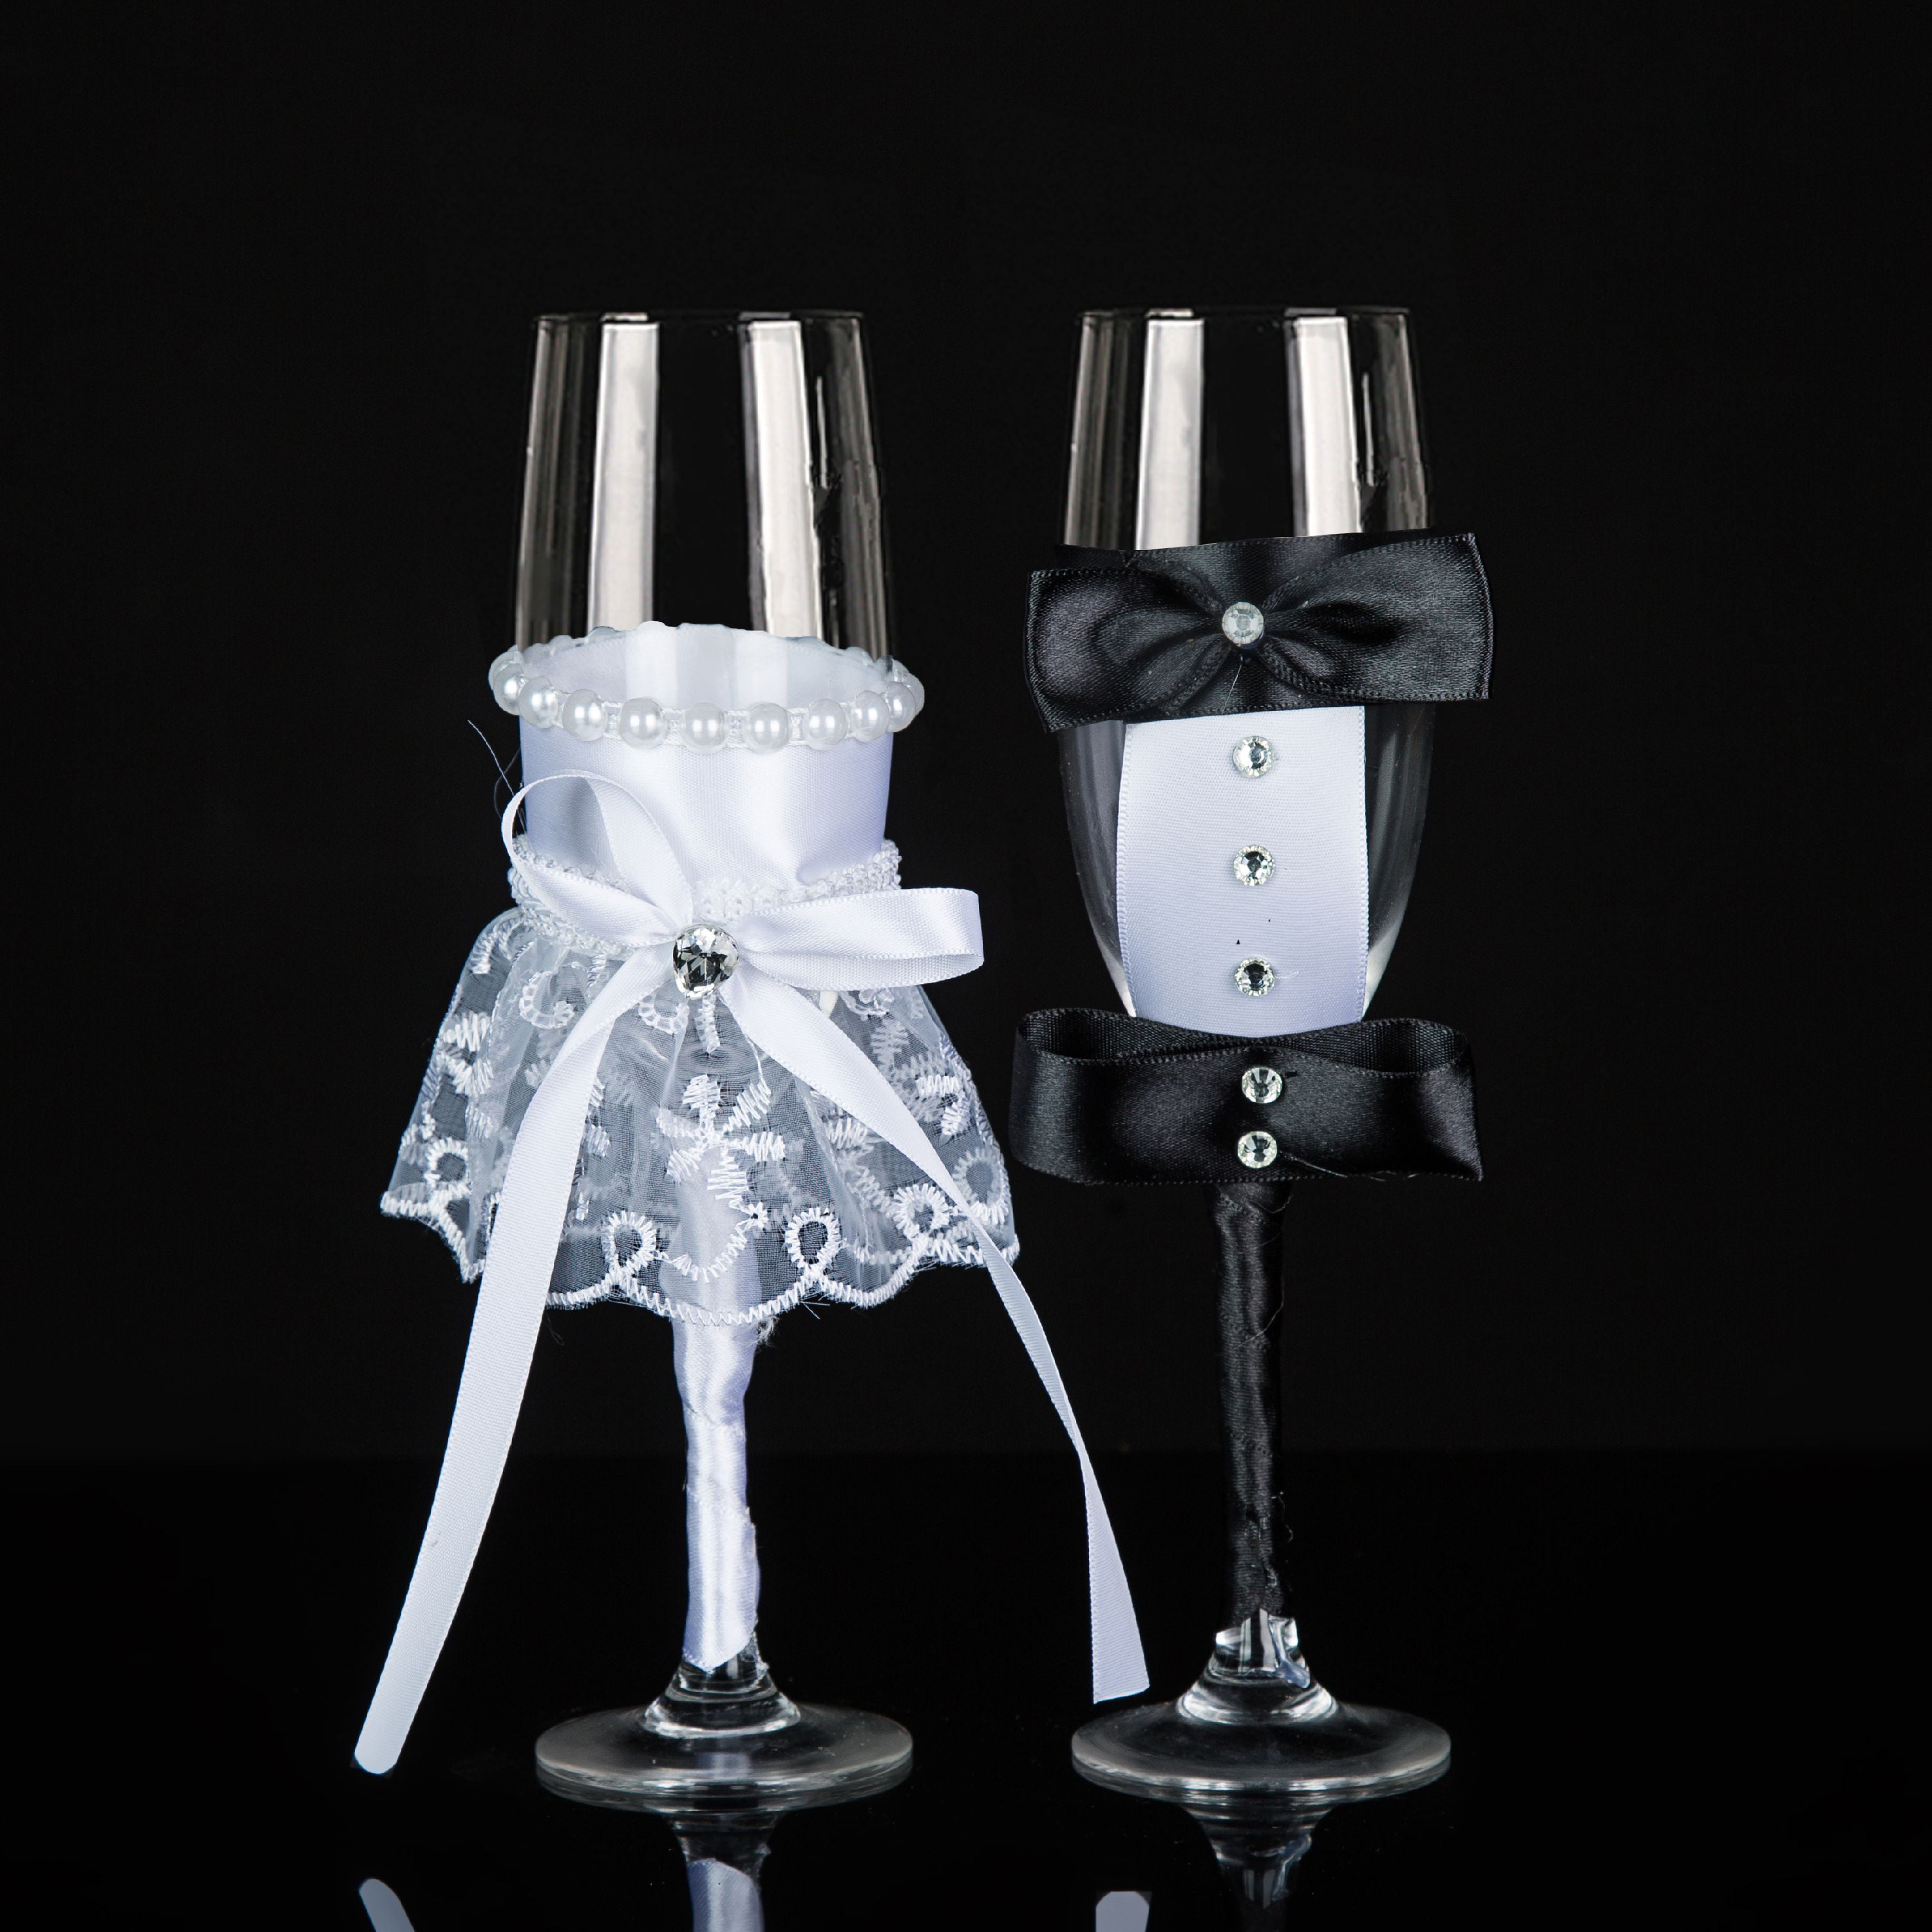 Bride & Groom Mr  Mrs Champagne Glasses Flutes Pair Toasting Wedding Gifts Party 